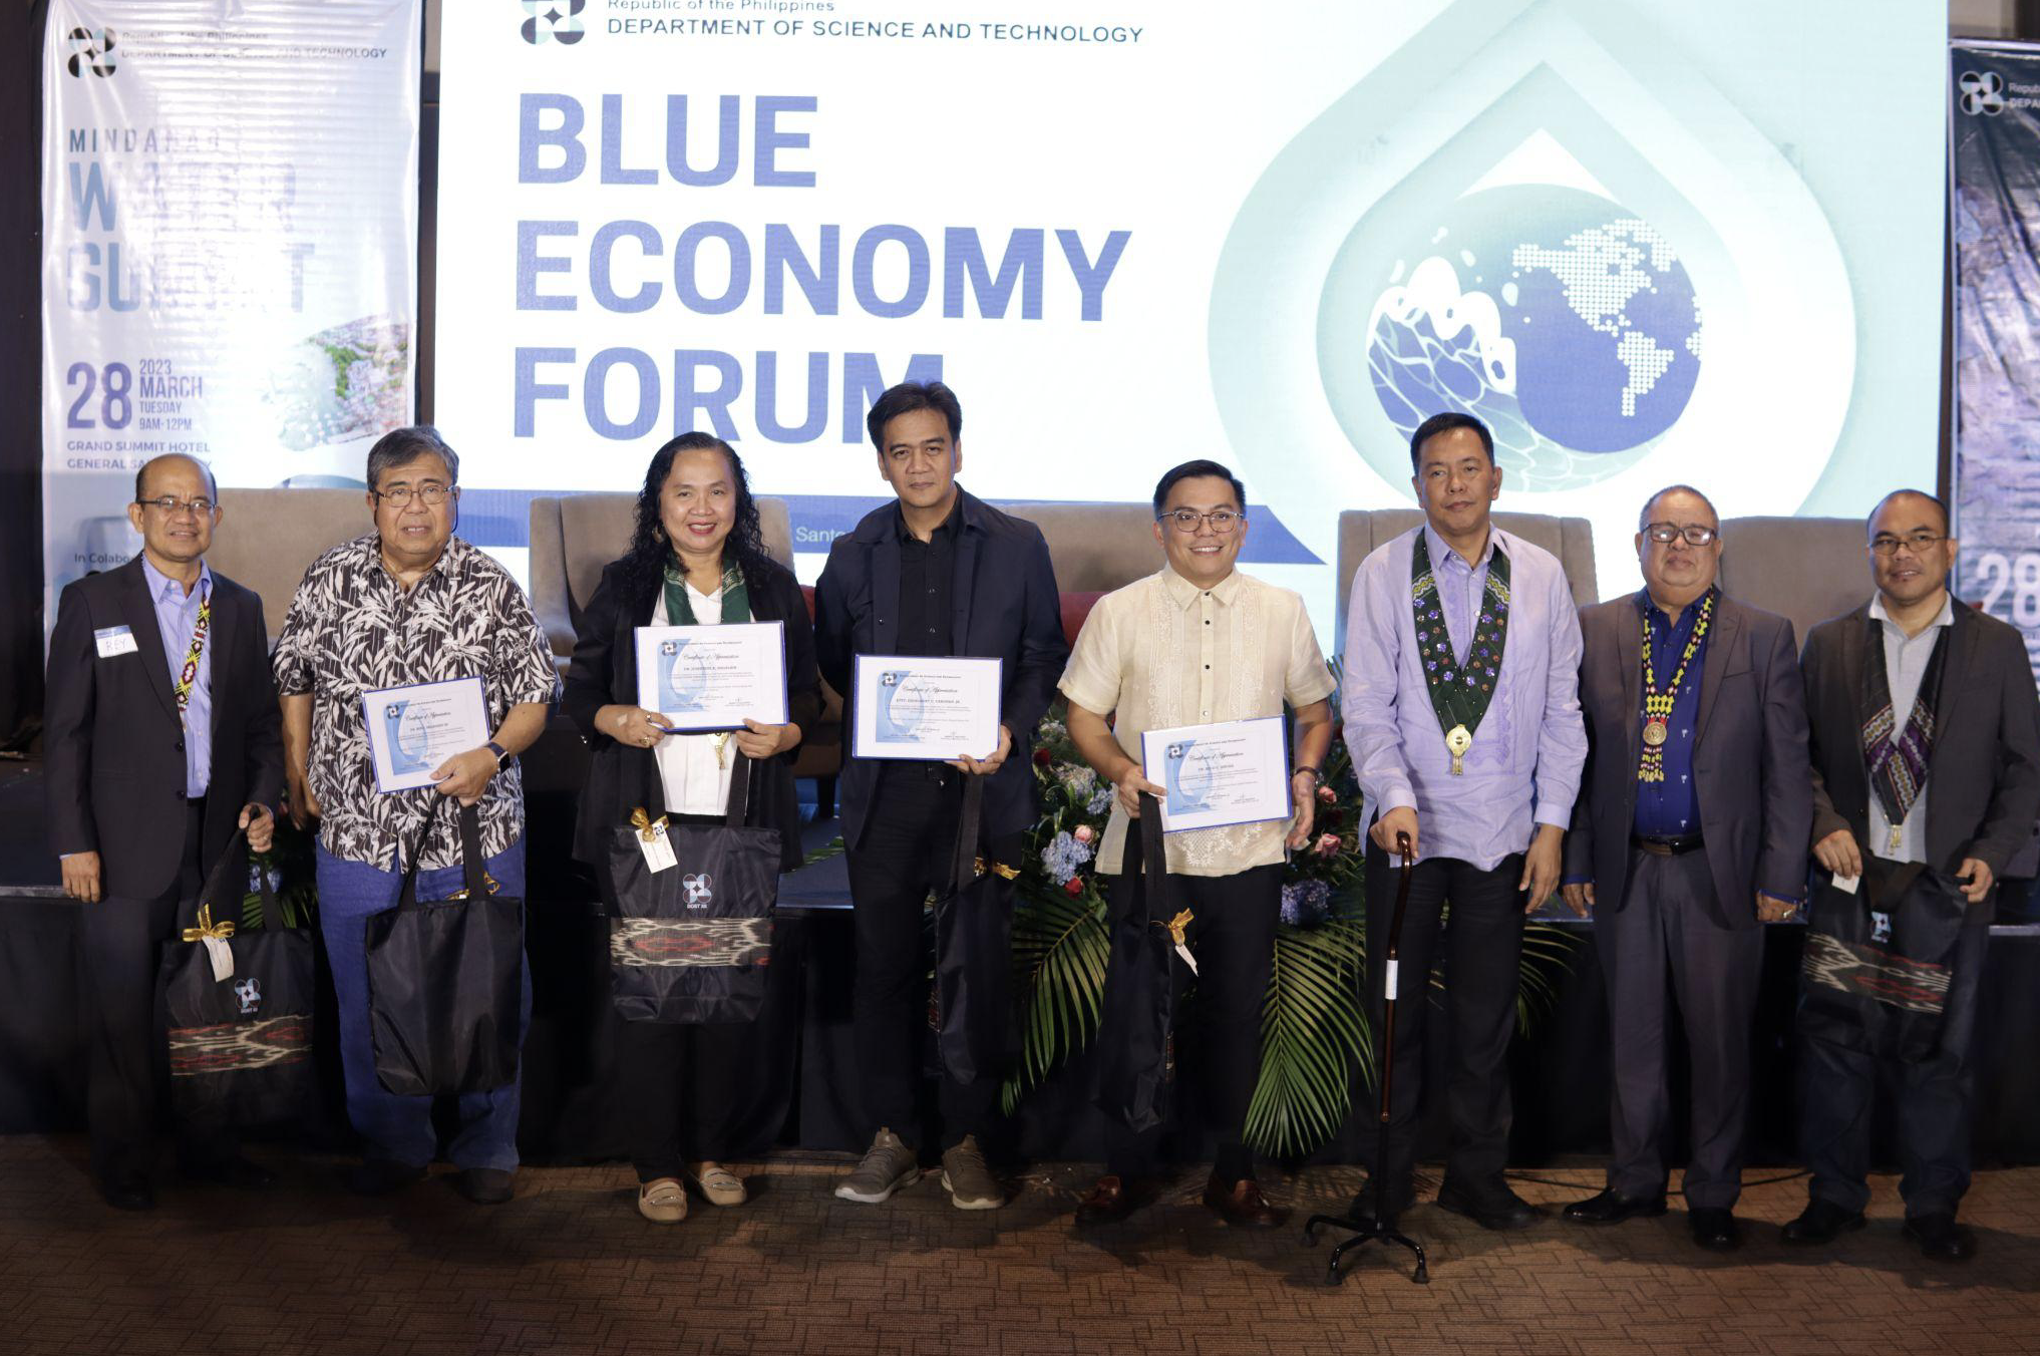 Blue Economy Forum speakers (2nd to 4th person from left): Professor Emeritus Ben Malayang; SOXAARRDEC Consortium Director Josephine Migalbin; Atty. Engelbert Caronan; UPLB-School of Environmental Science and Management Dean Rico C. Ancog; with DOST Officials: Undersecretary for Regional Operation Sancho A. Mabborang; DOST-XII Director Sammy P. Malawan; with Environmental Planner Jobe Tubigon (Image Credit: DOST 12)